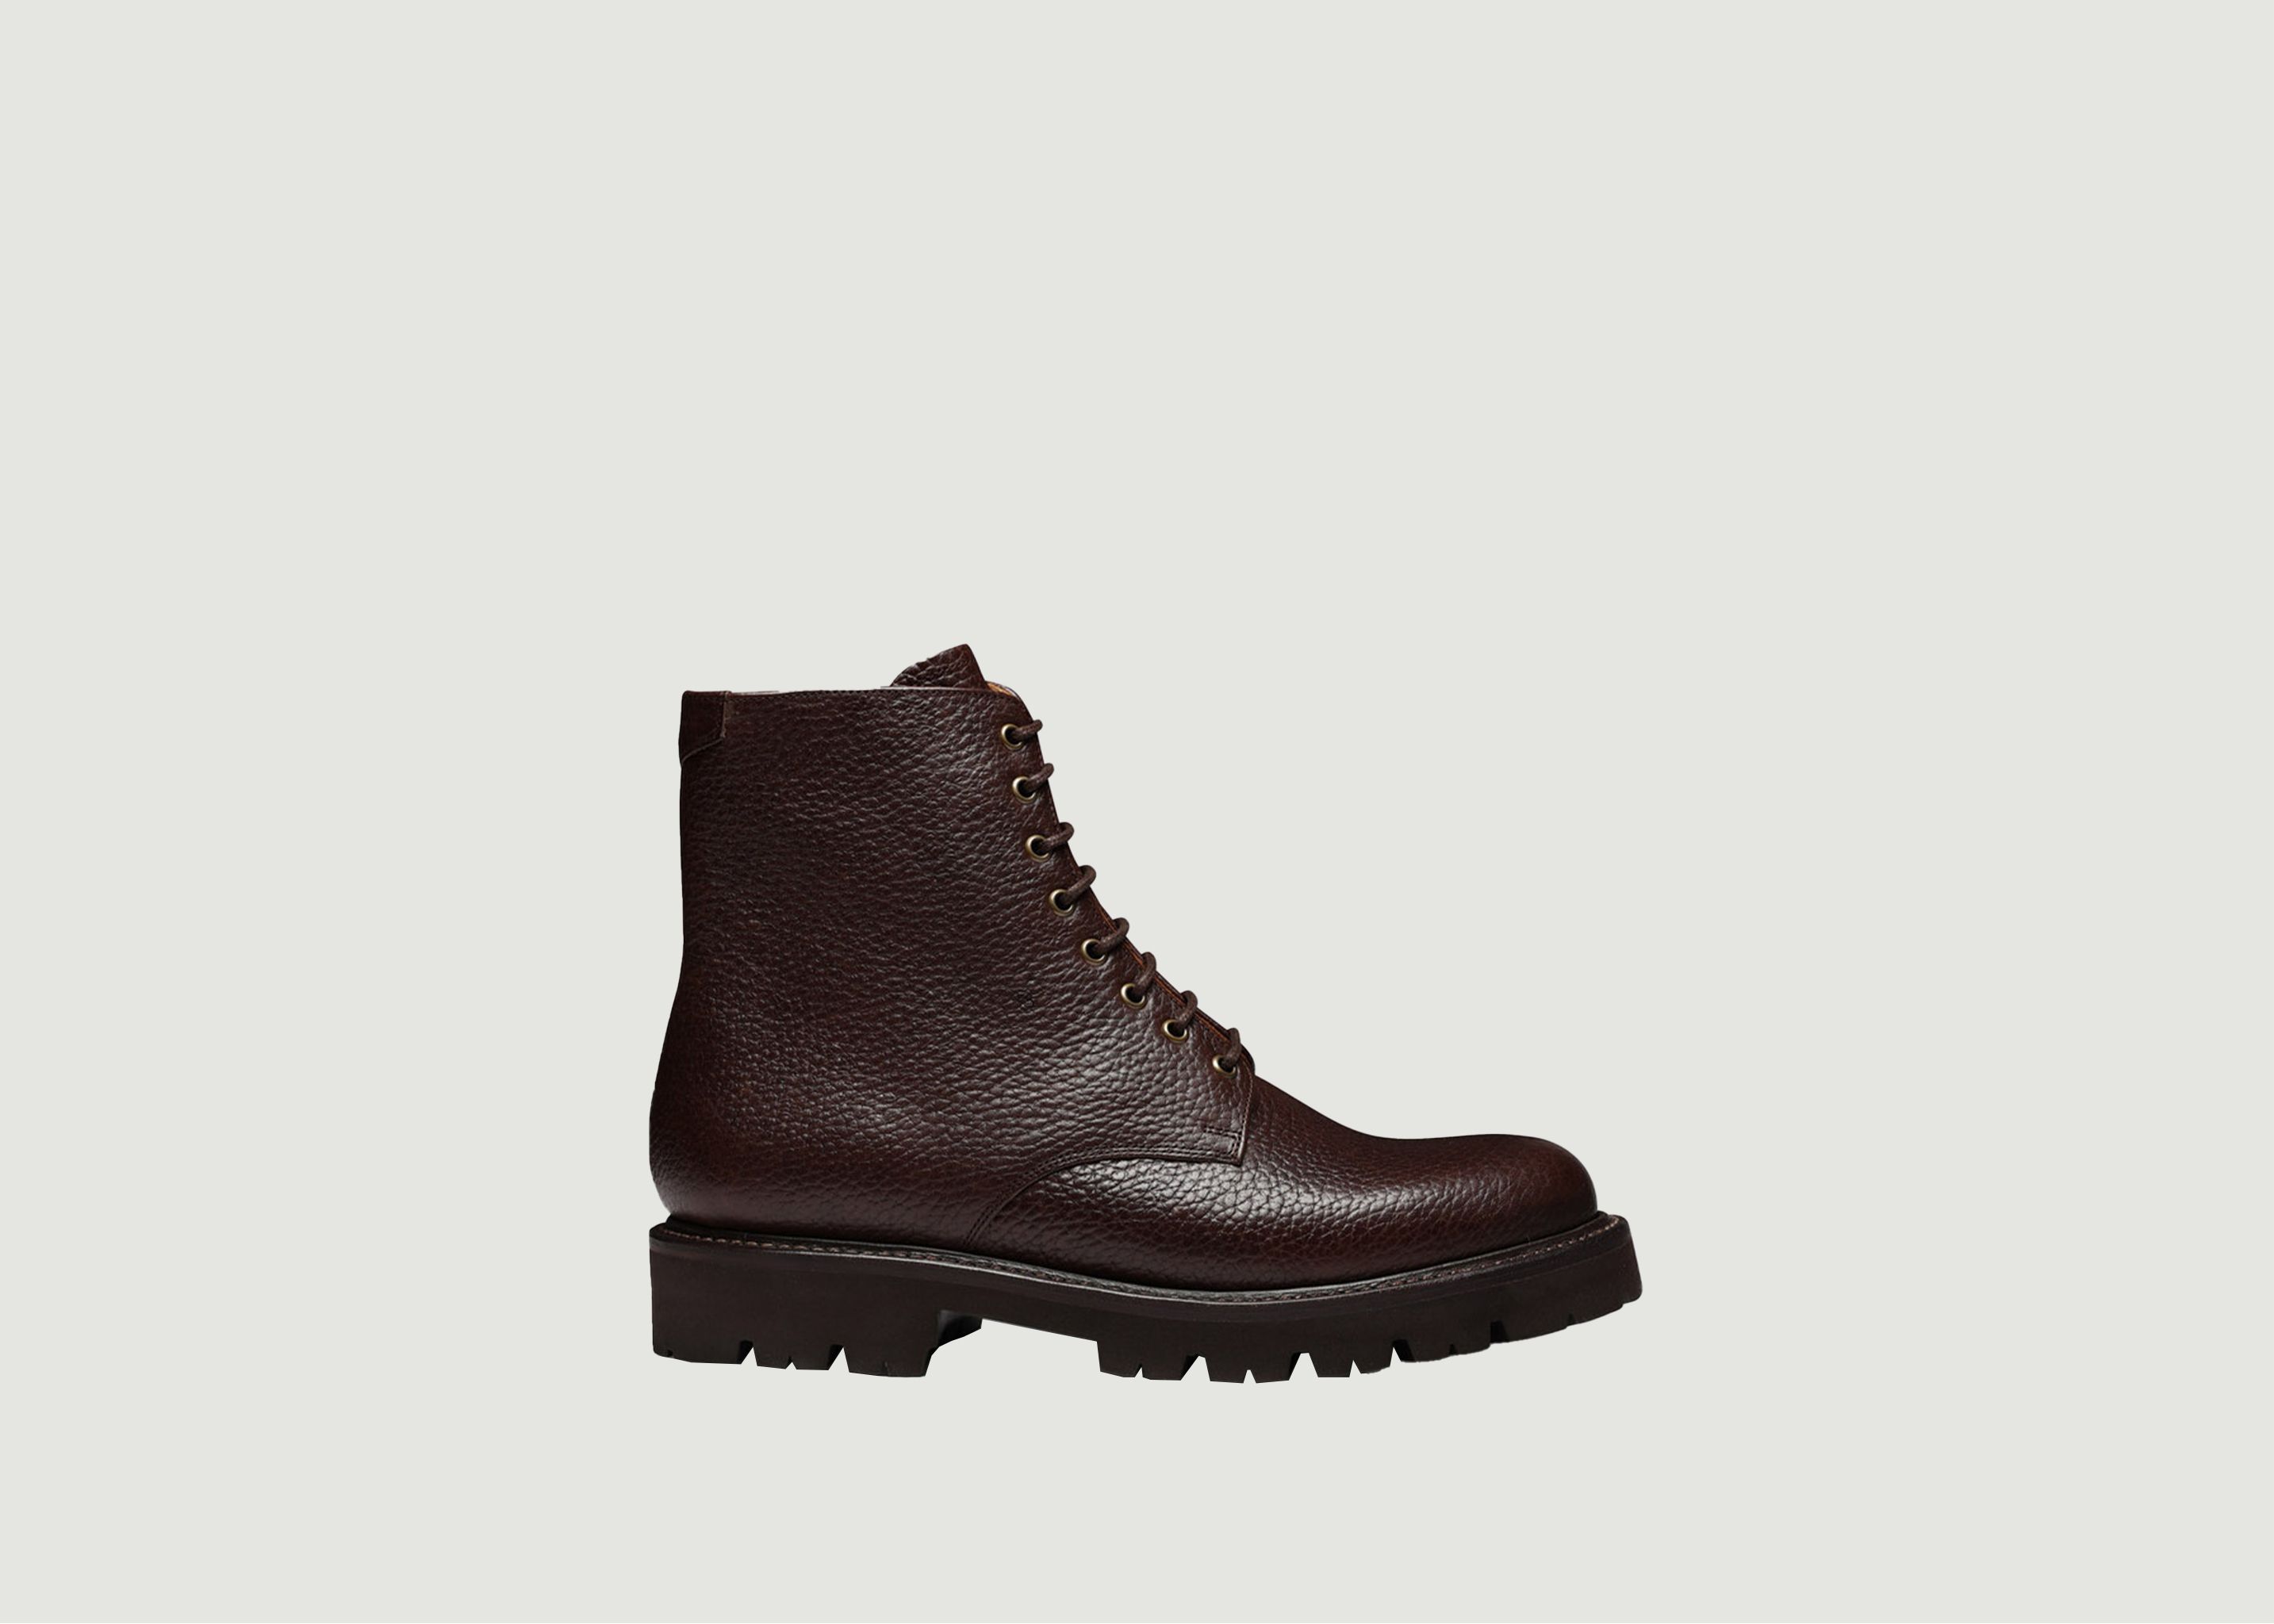 Hadley boots in hammered calf leather - Grenson